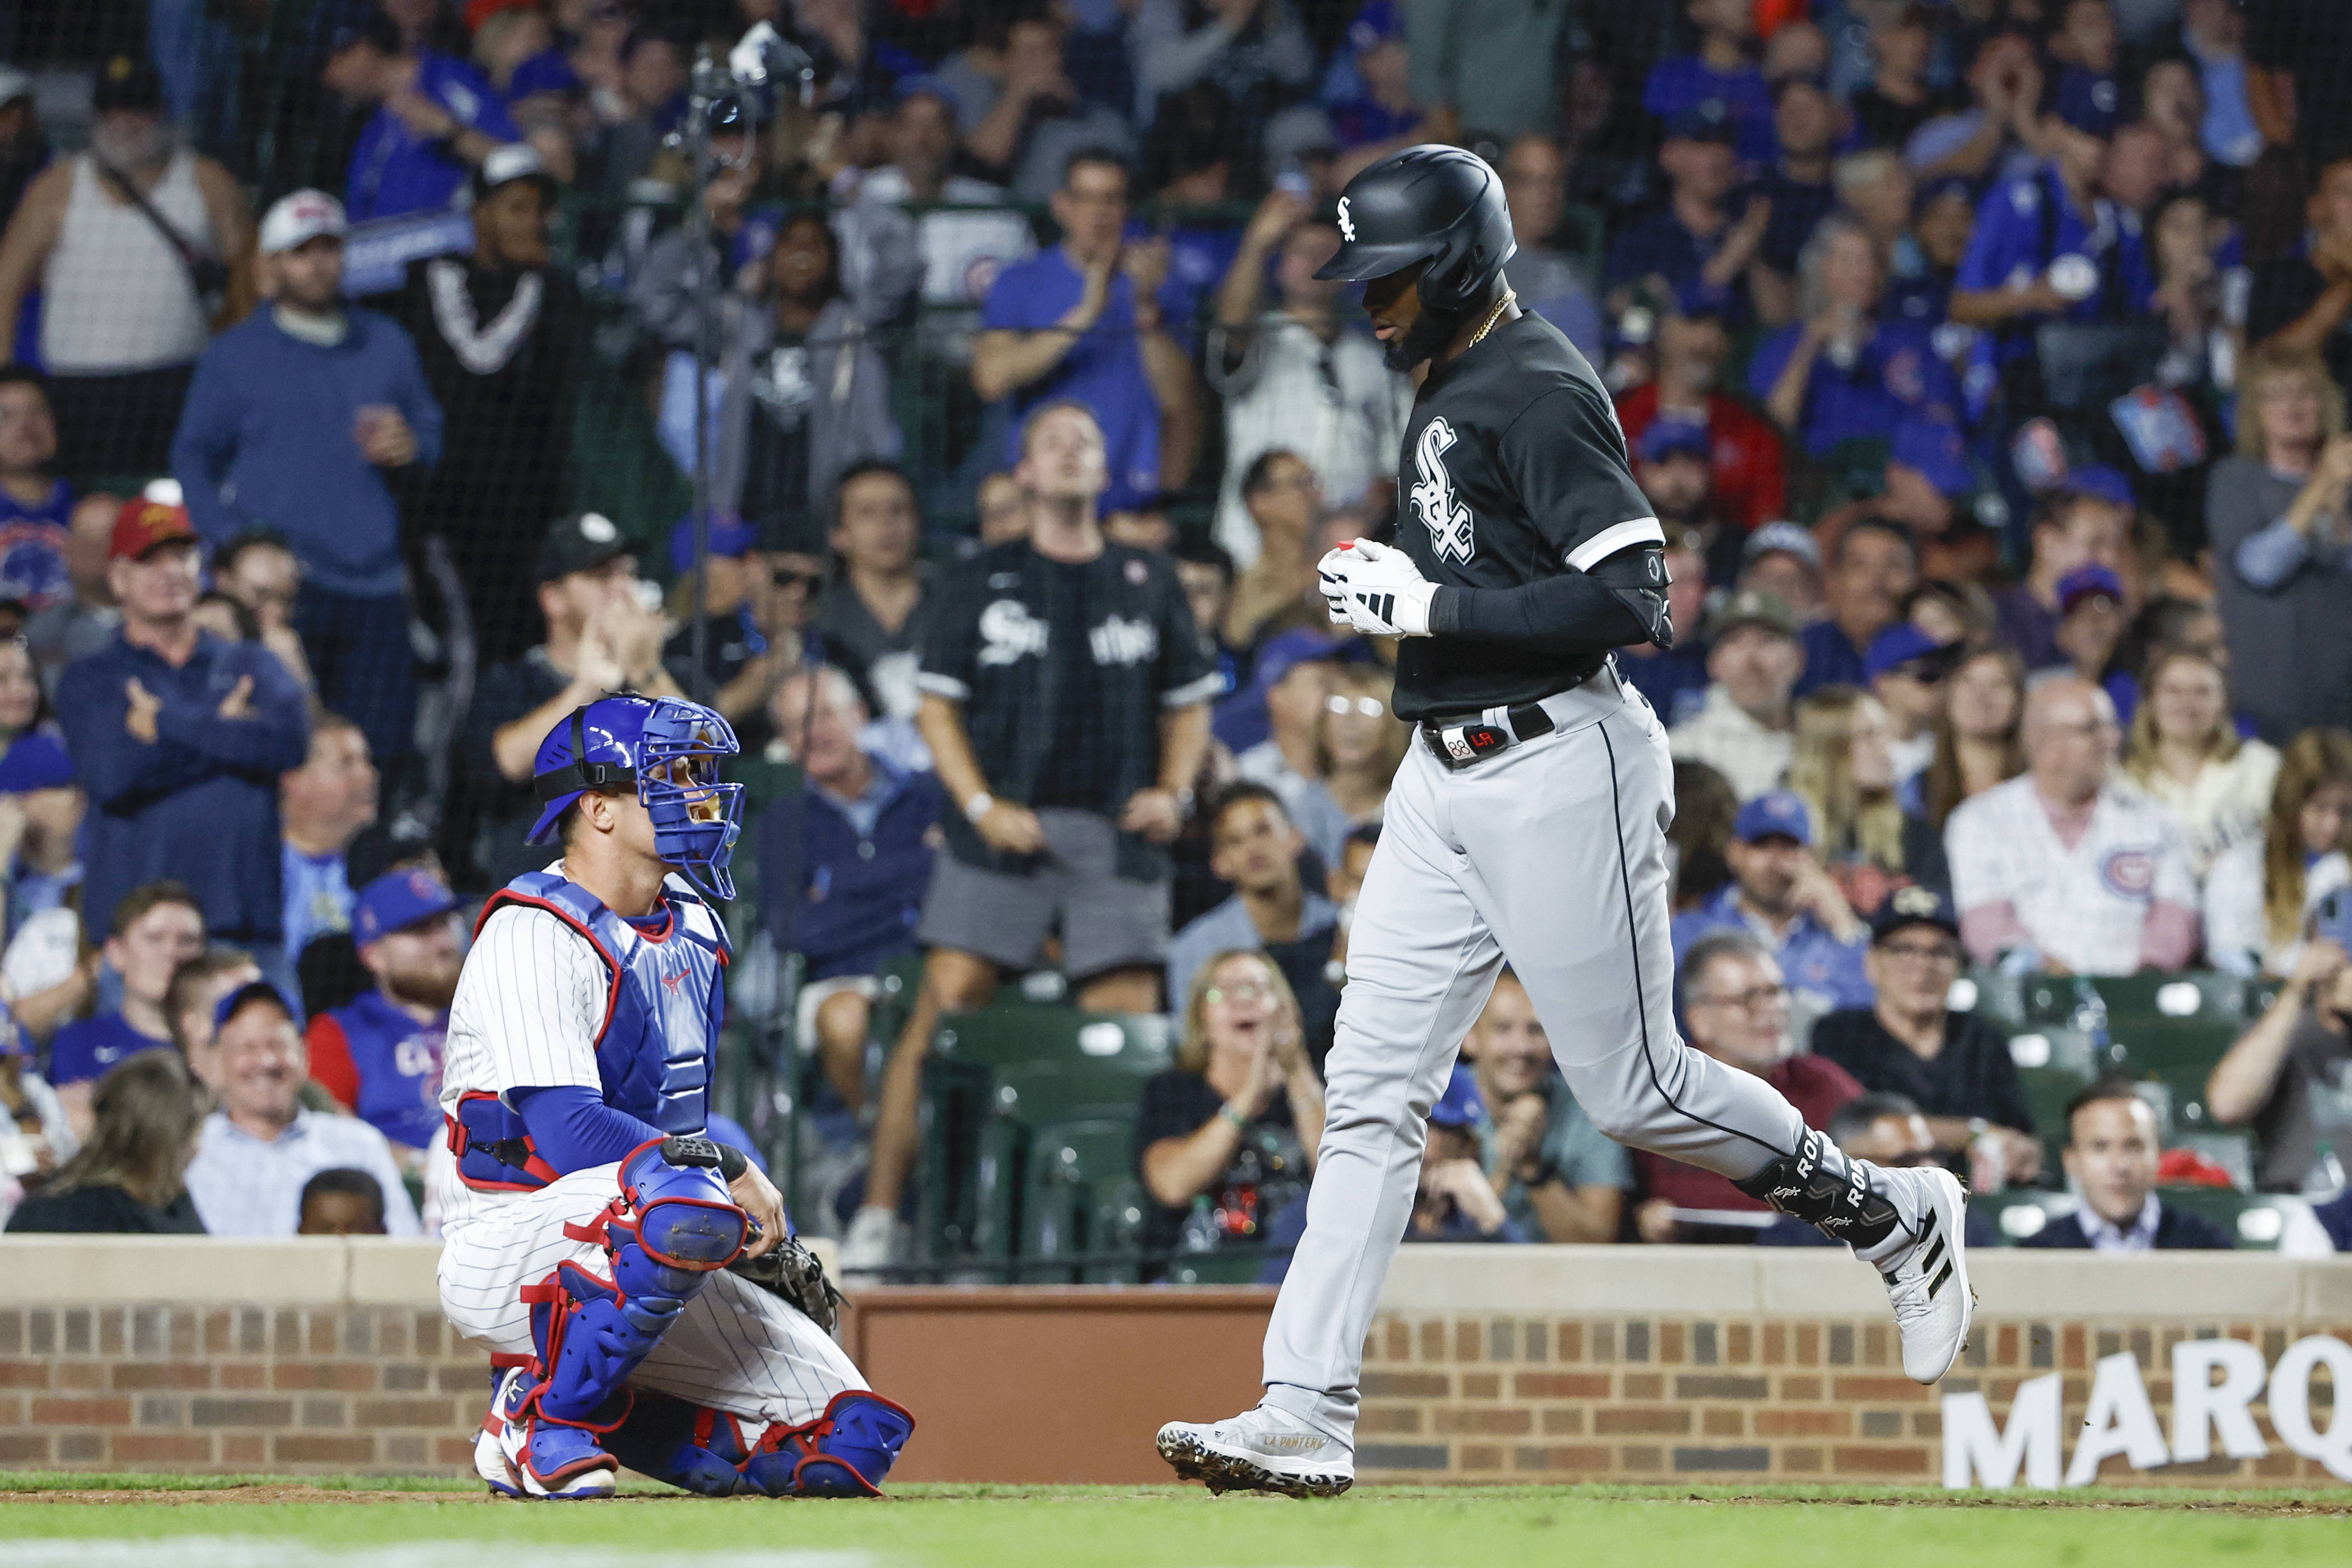 Luis Robert Jr. homers in return as White Sox beat Cubs 5-3 – NBC Sports  Chicago